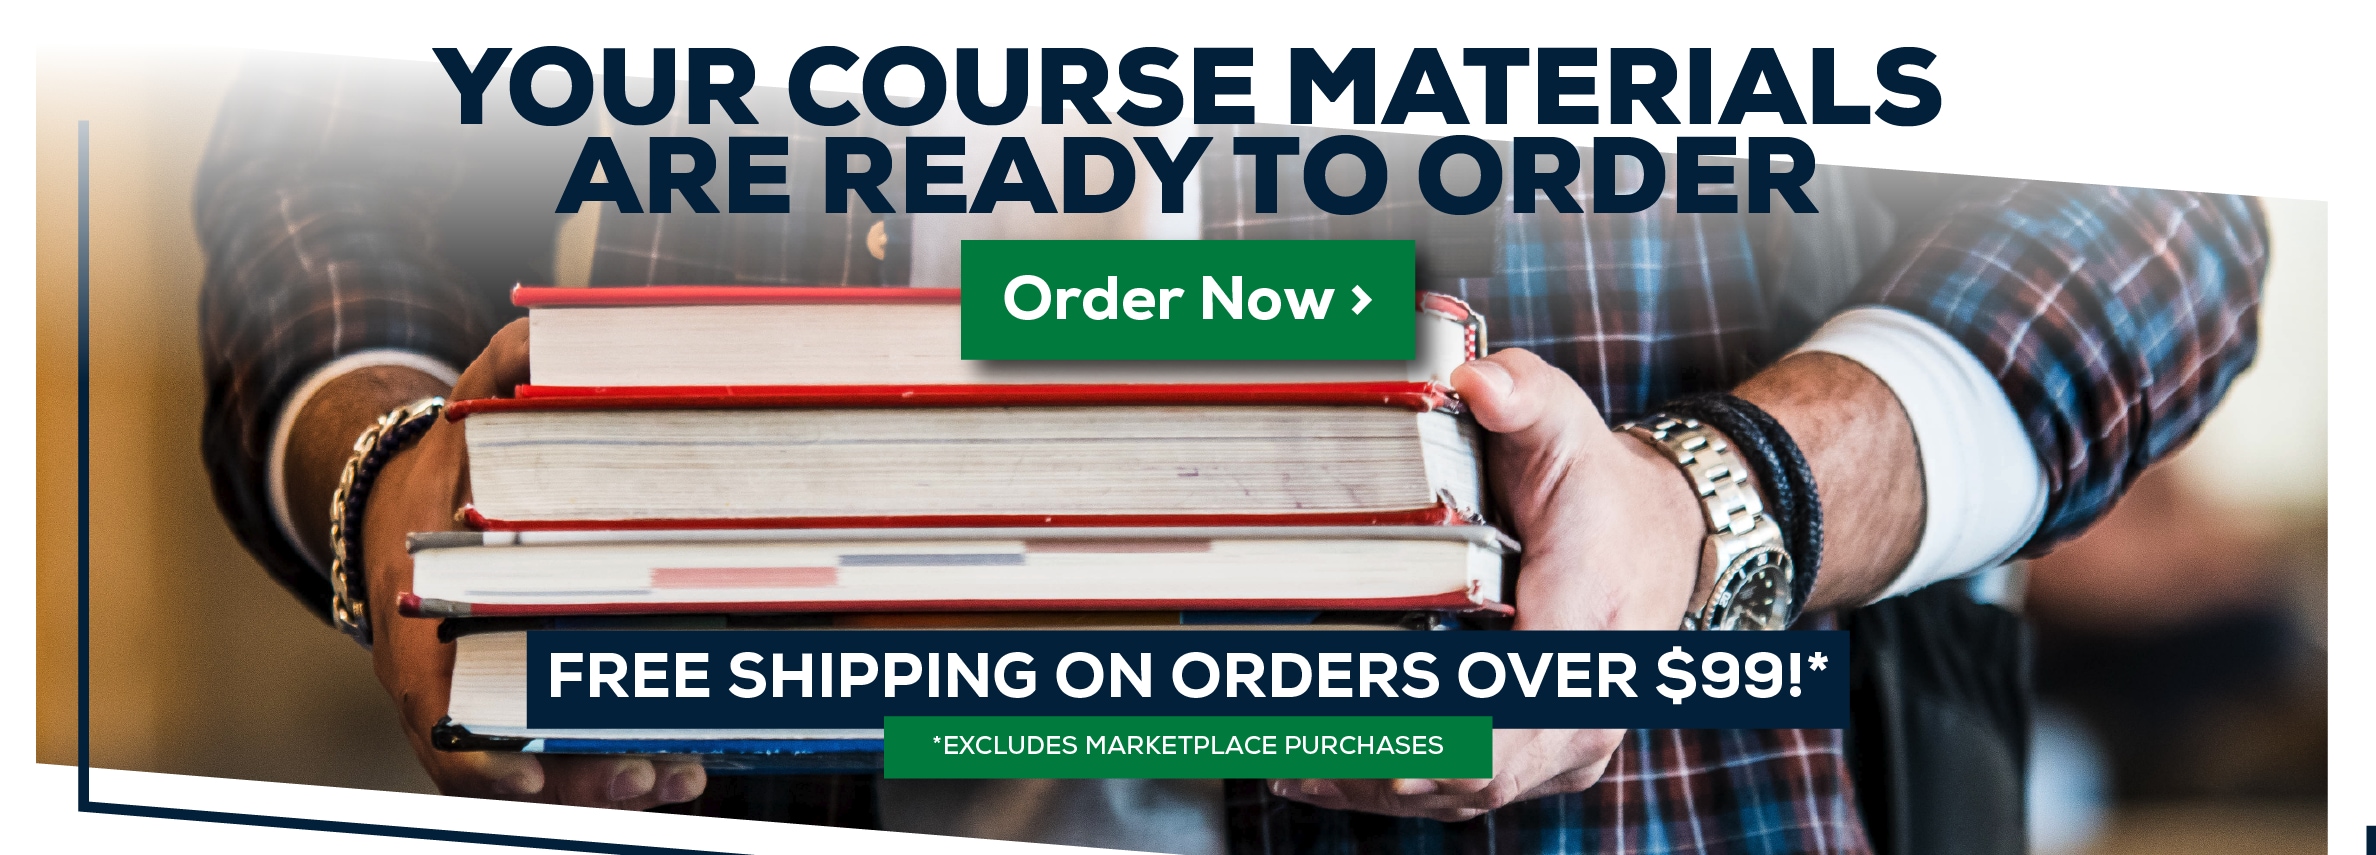 Your Course Materials are Ready to Order. Order Now. Free shipping on orders over $99! *Excludes marketplace purchases.